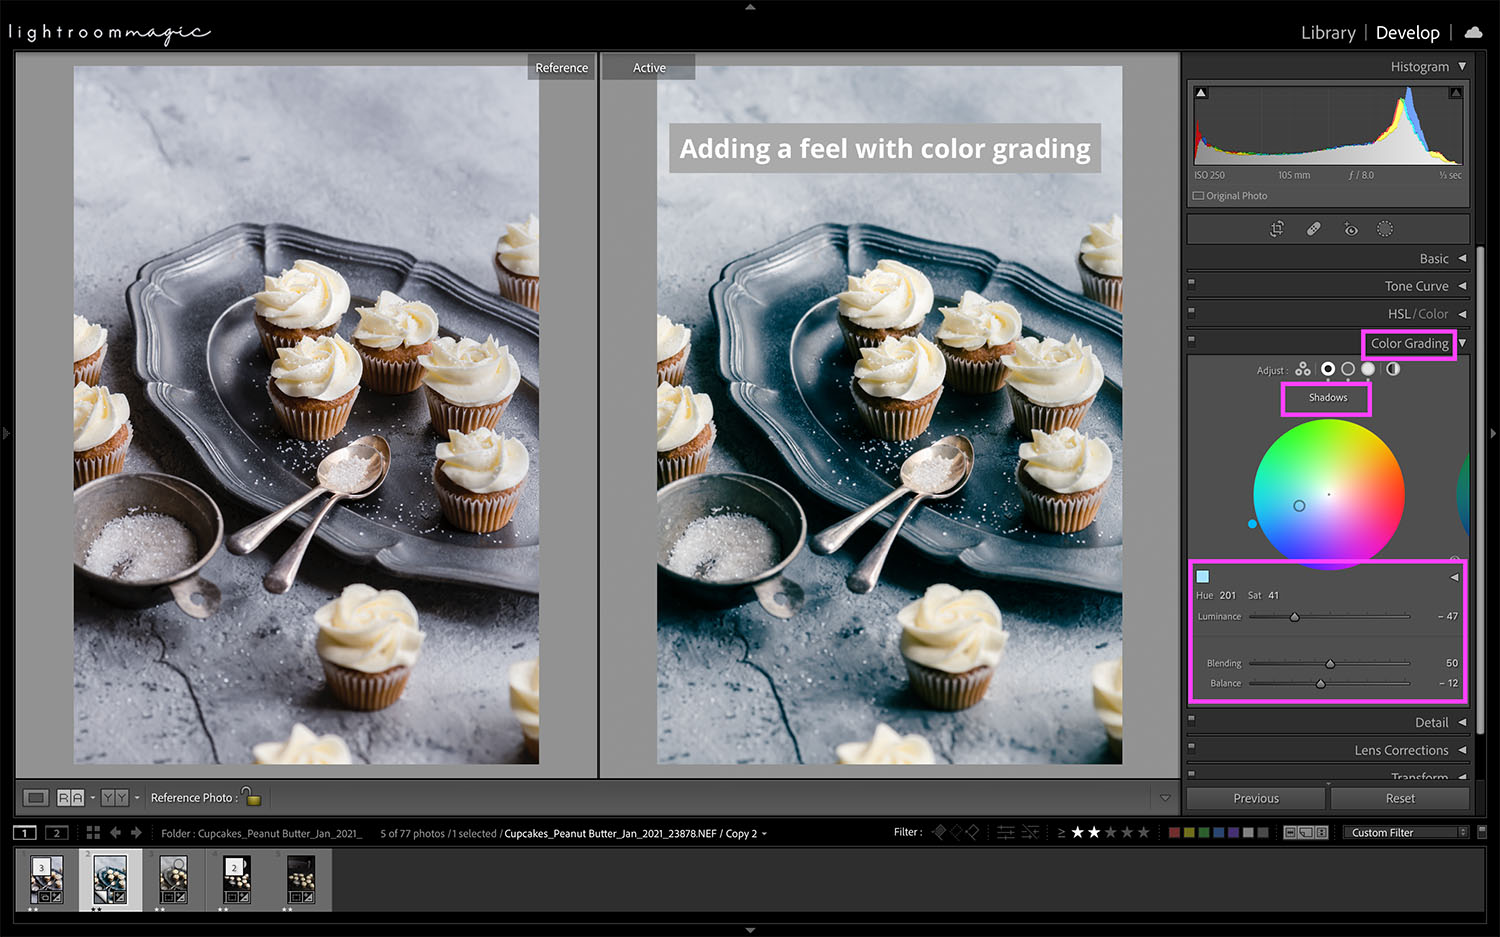 Screenshot showing vanilla cupcakes on a serving platter. Editing color in lightroom by adding blue to the shadows.